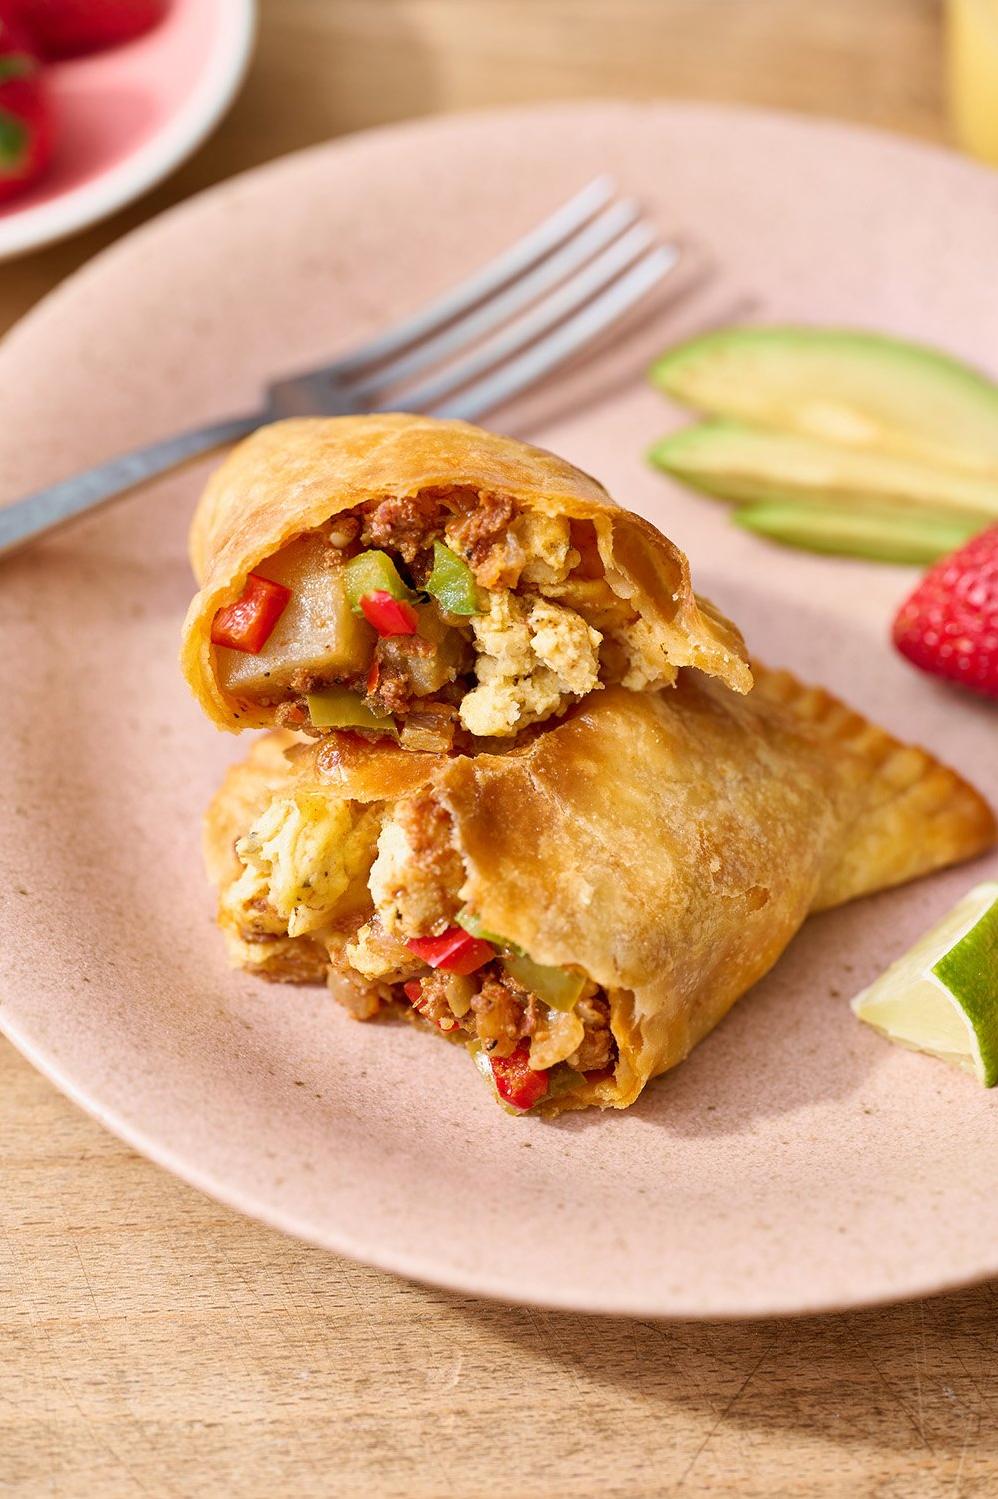  Ready to take the traditional empanada for a healthy spin? This recipe is for you!